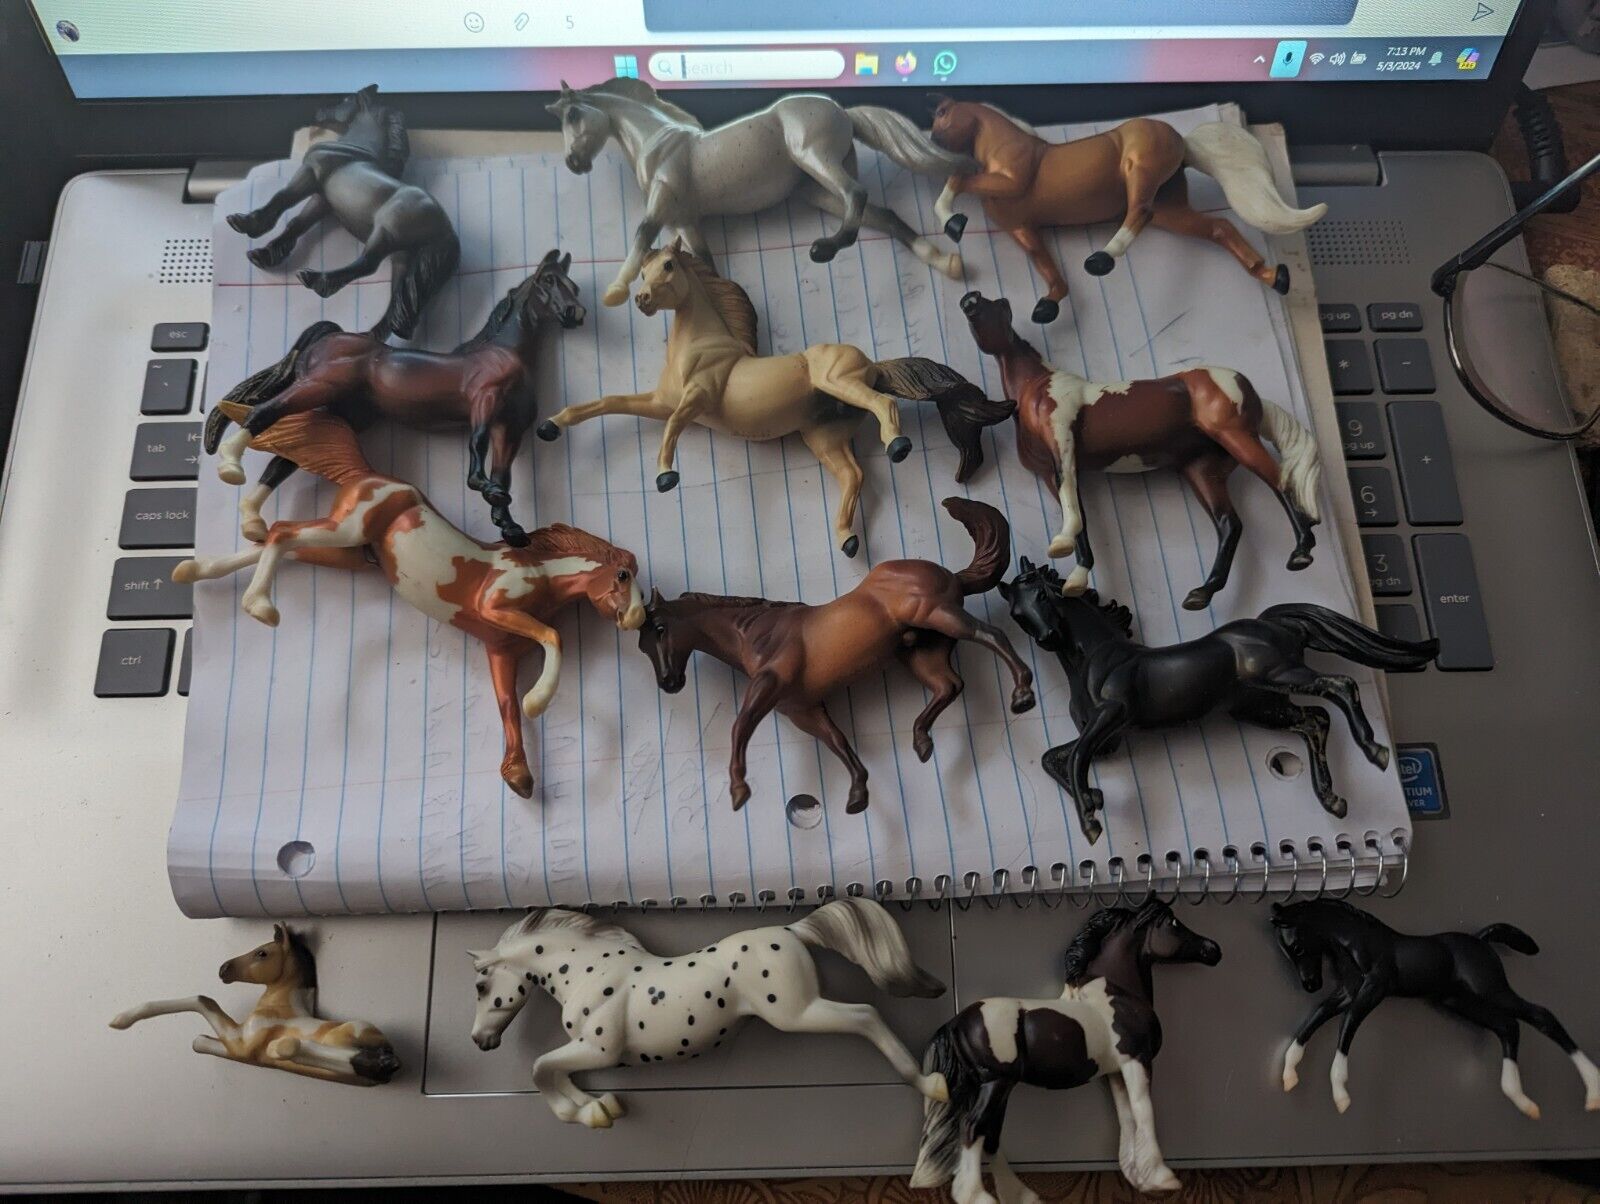 Lot Of 13 RARE Breyer Horses Reeves Stablemates Plastic Toys Figurines